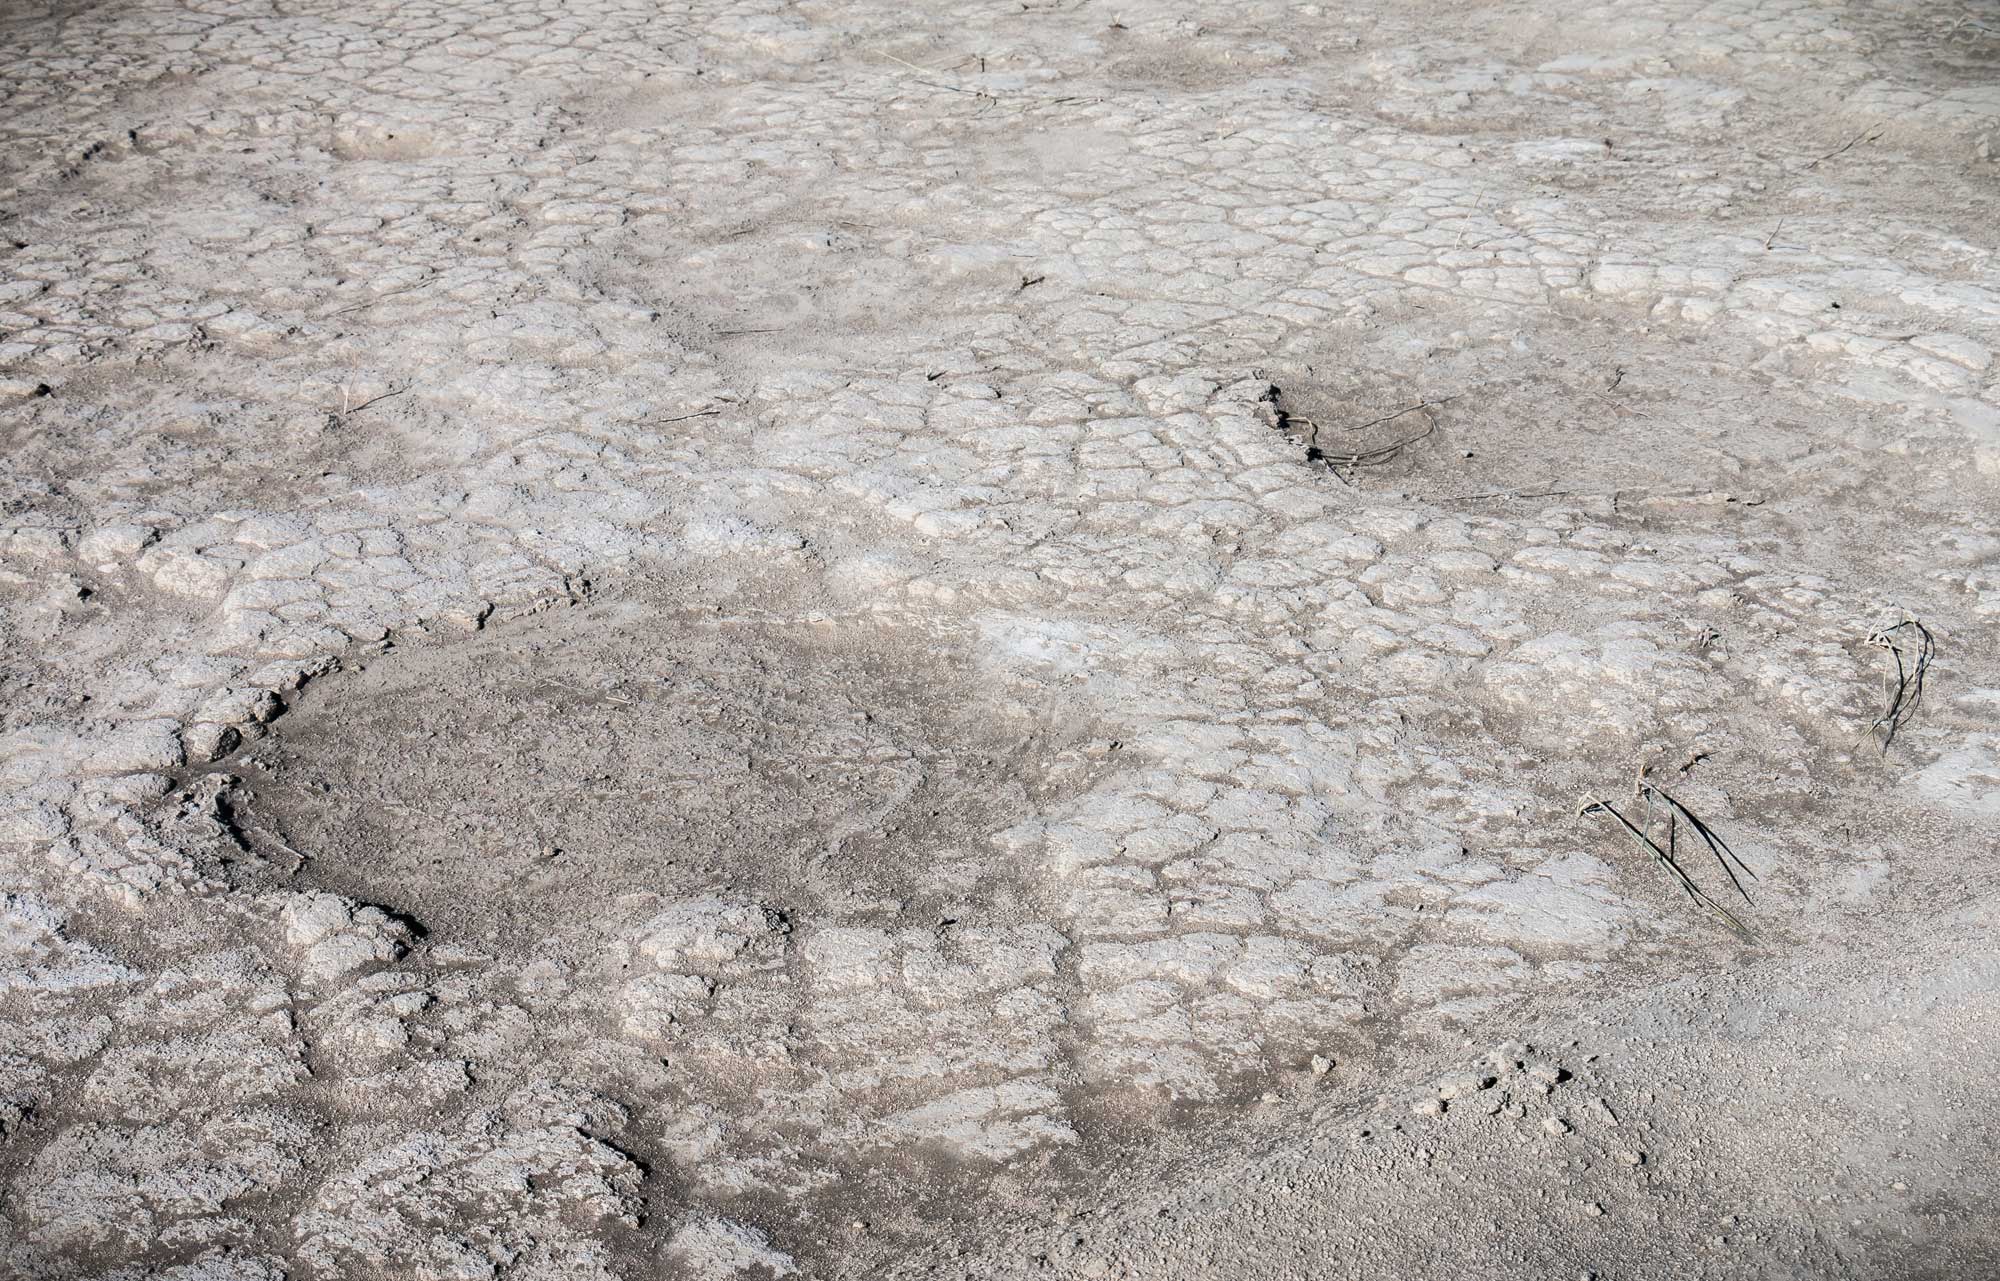 Photograph of dry ground with mudcracks. In the foreground, two large, circular depressions can be seen. These depressions are mammoth tracks.